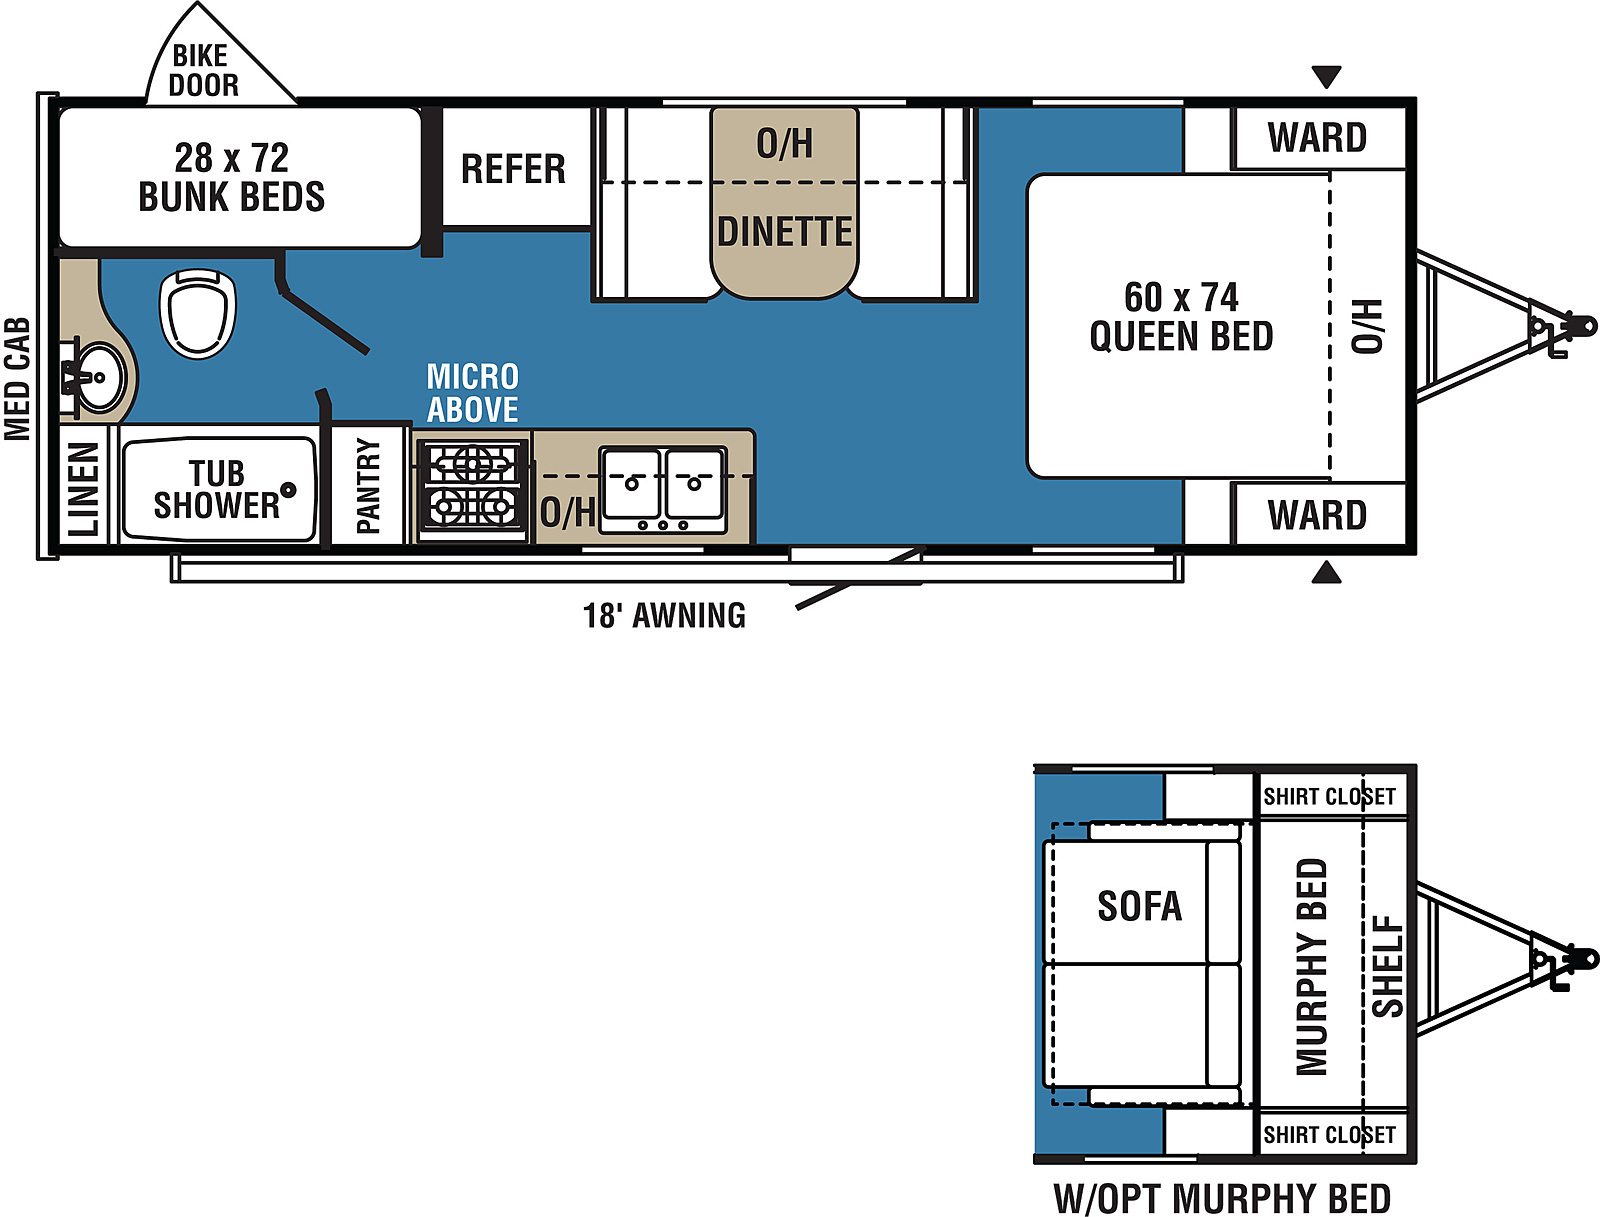 Clipper Ultra-Lite 21BH floorplan. The 21BH has no slide outs and one entry door.